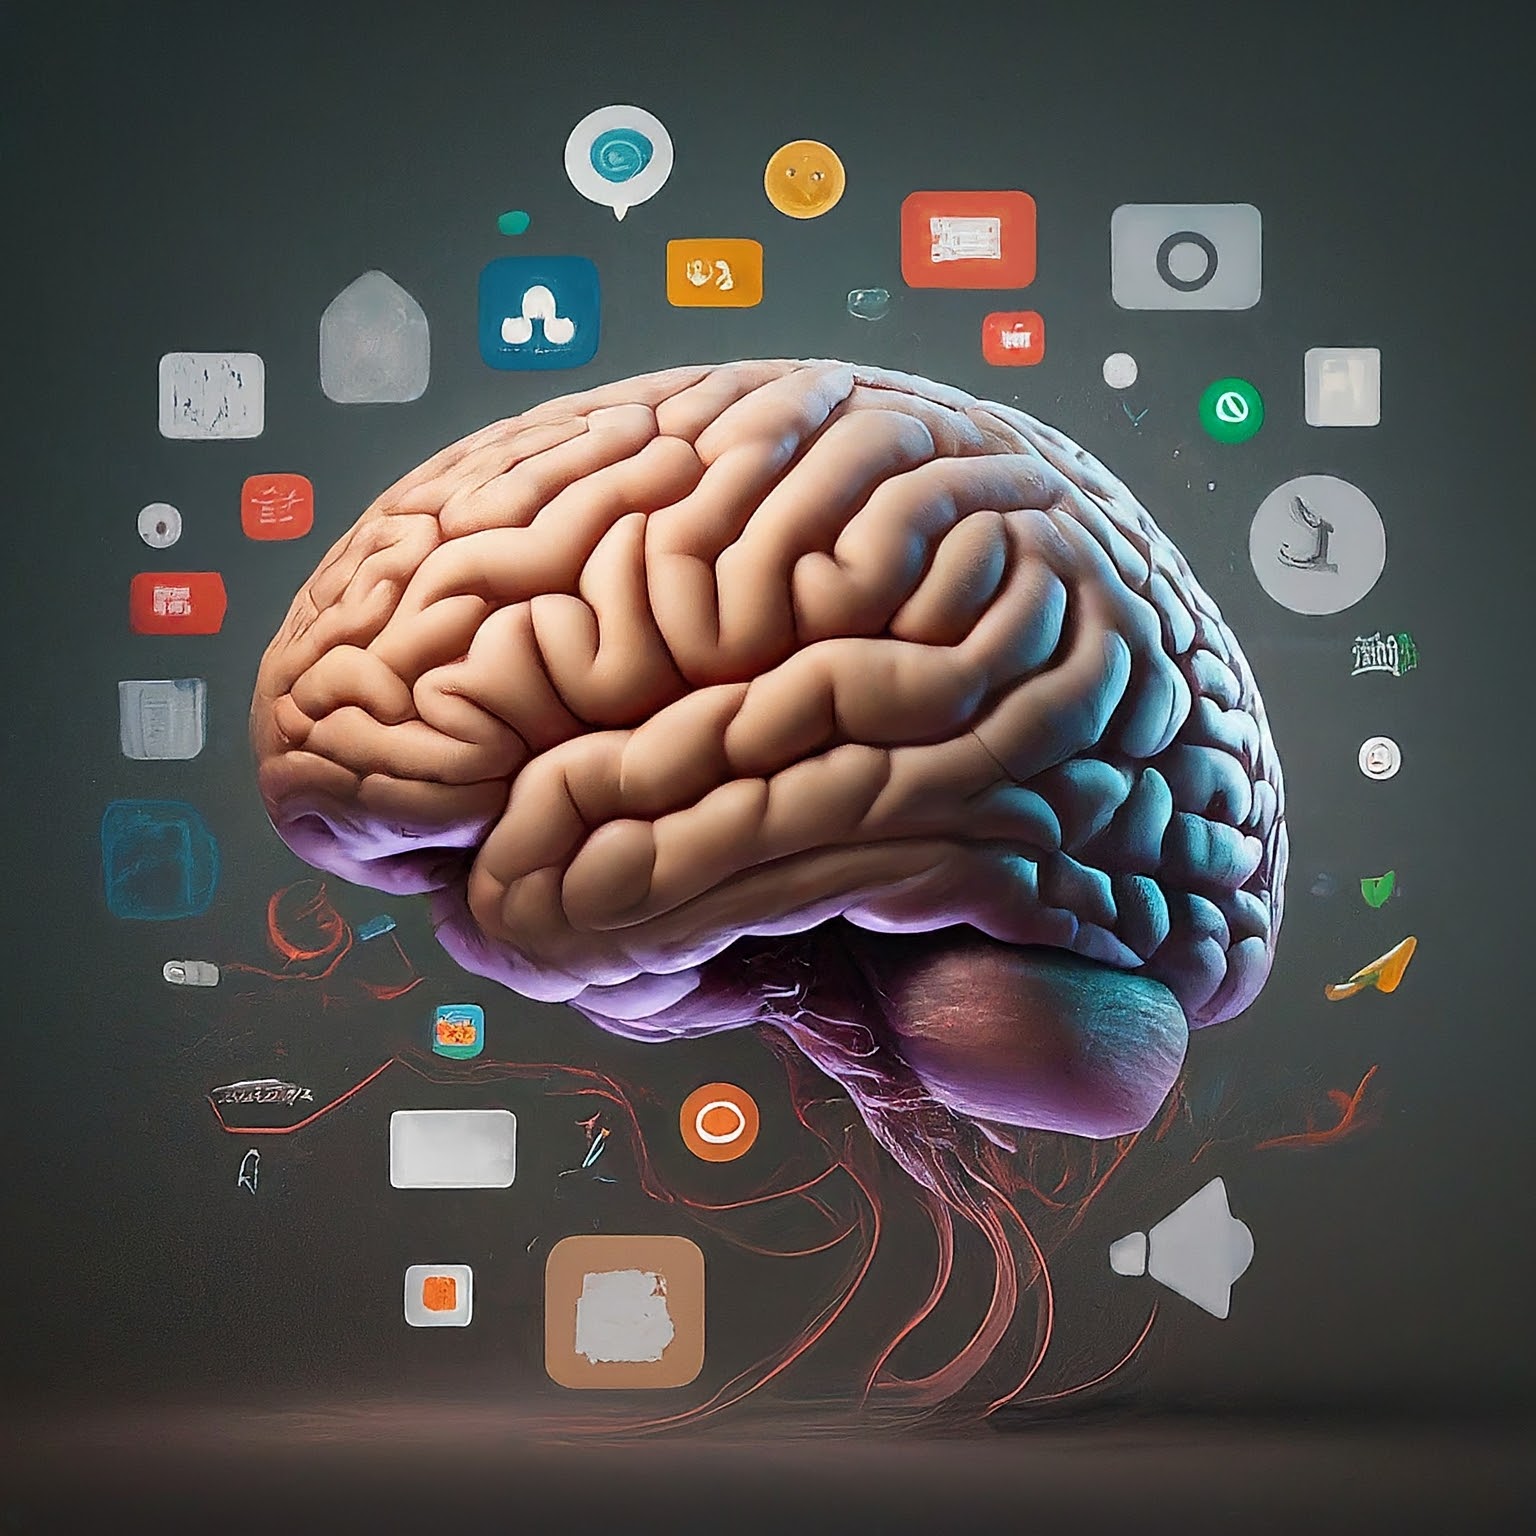 A photorealistic image of a brain with various design elements like icons, buttons, and navigation menus flowing around it. Text overlay reads: "The Psychology of UX/UI Design: Understanding Users Through the Power of the Mind."